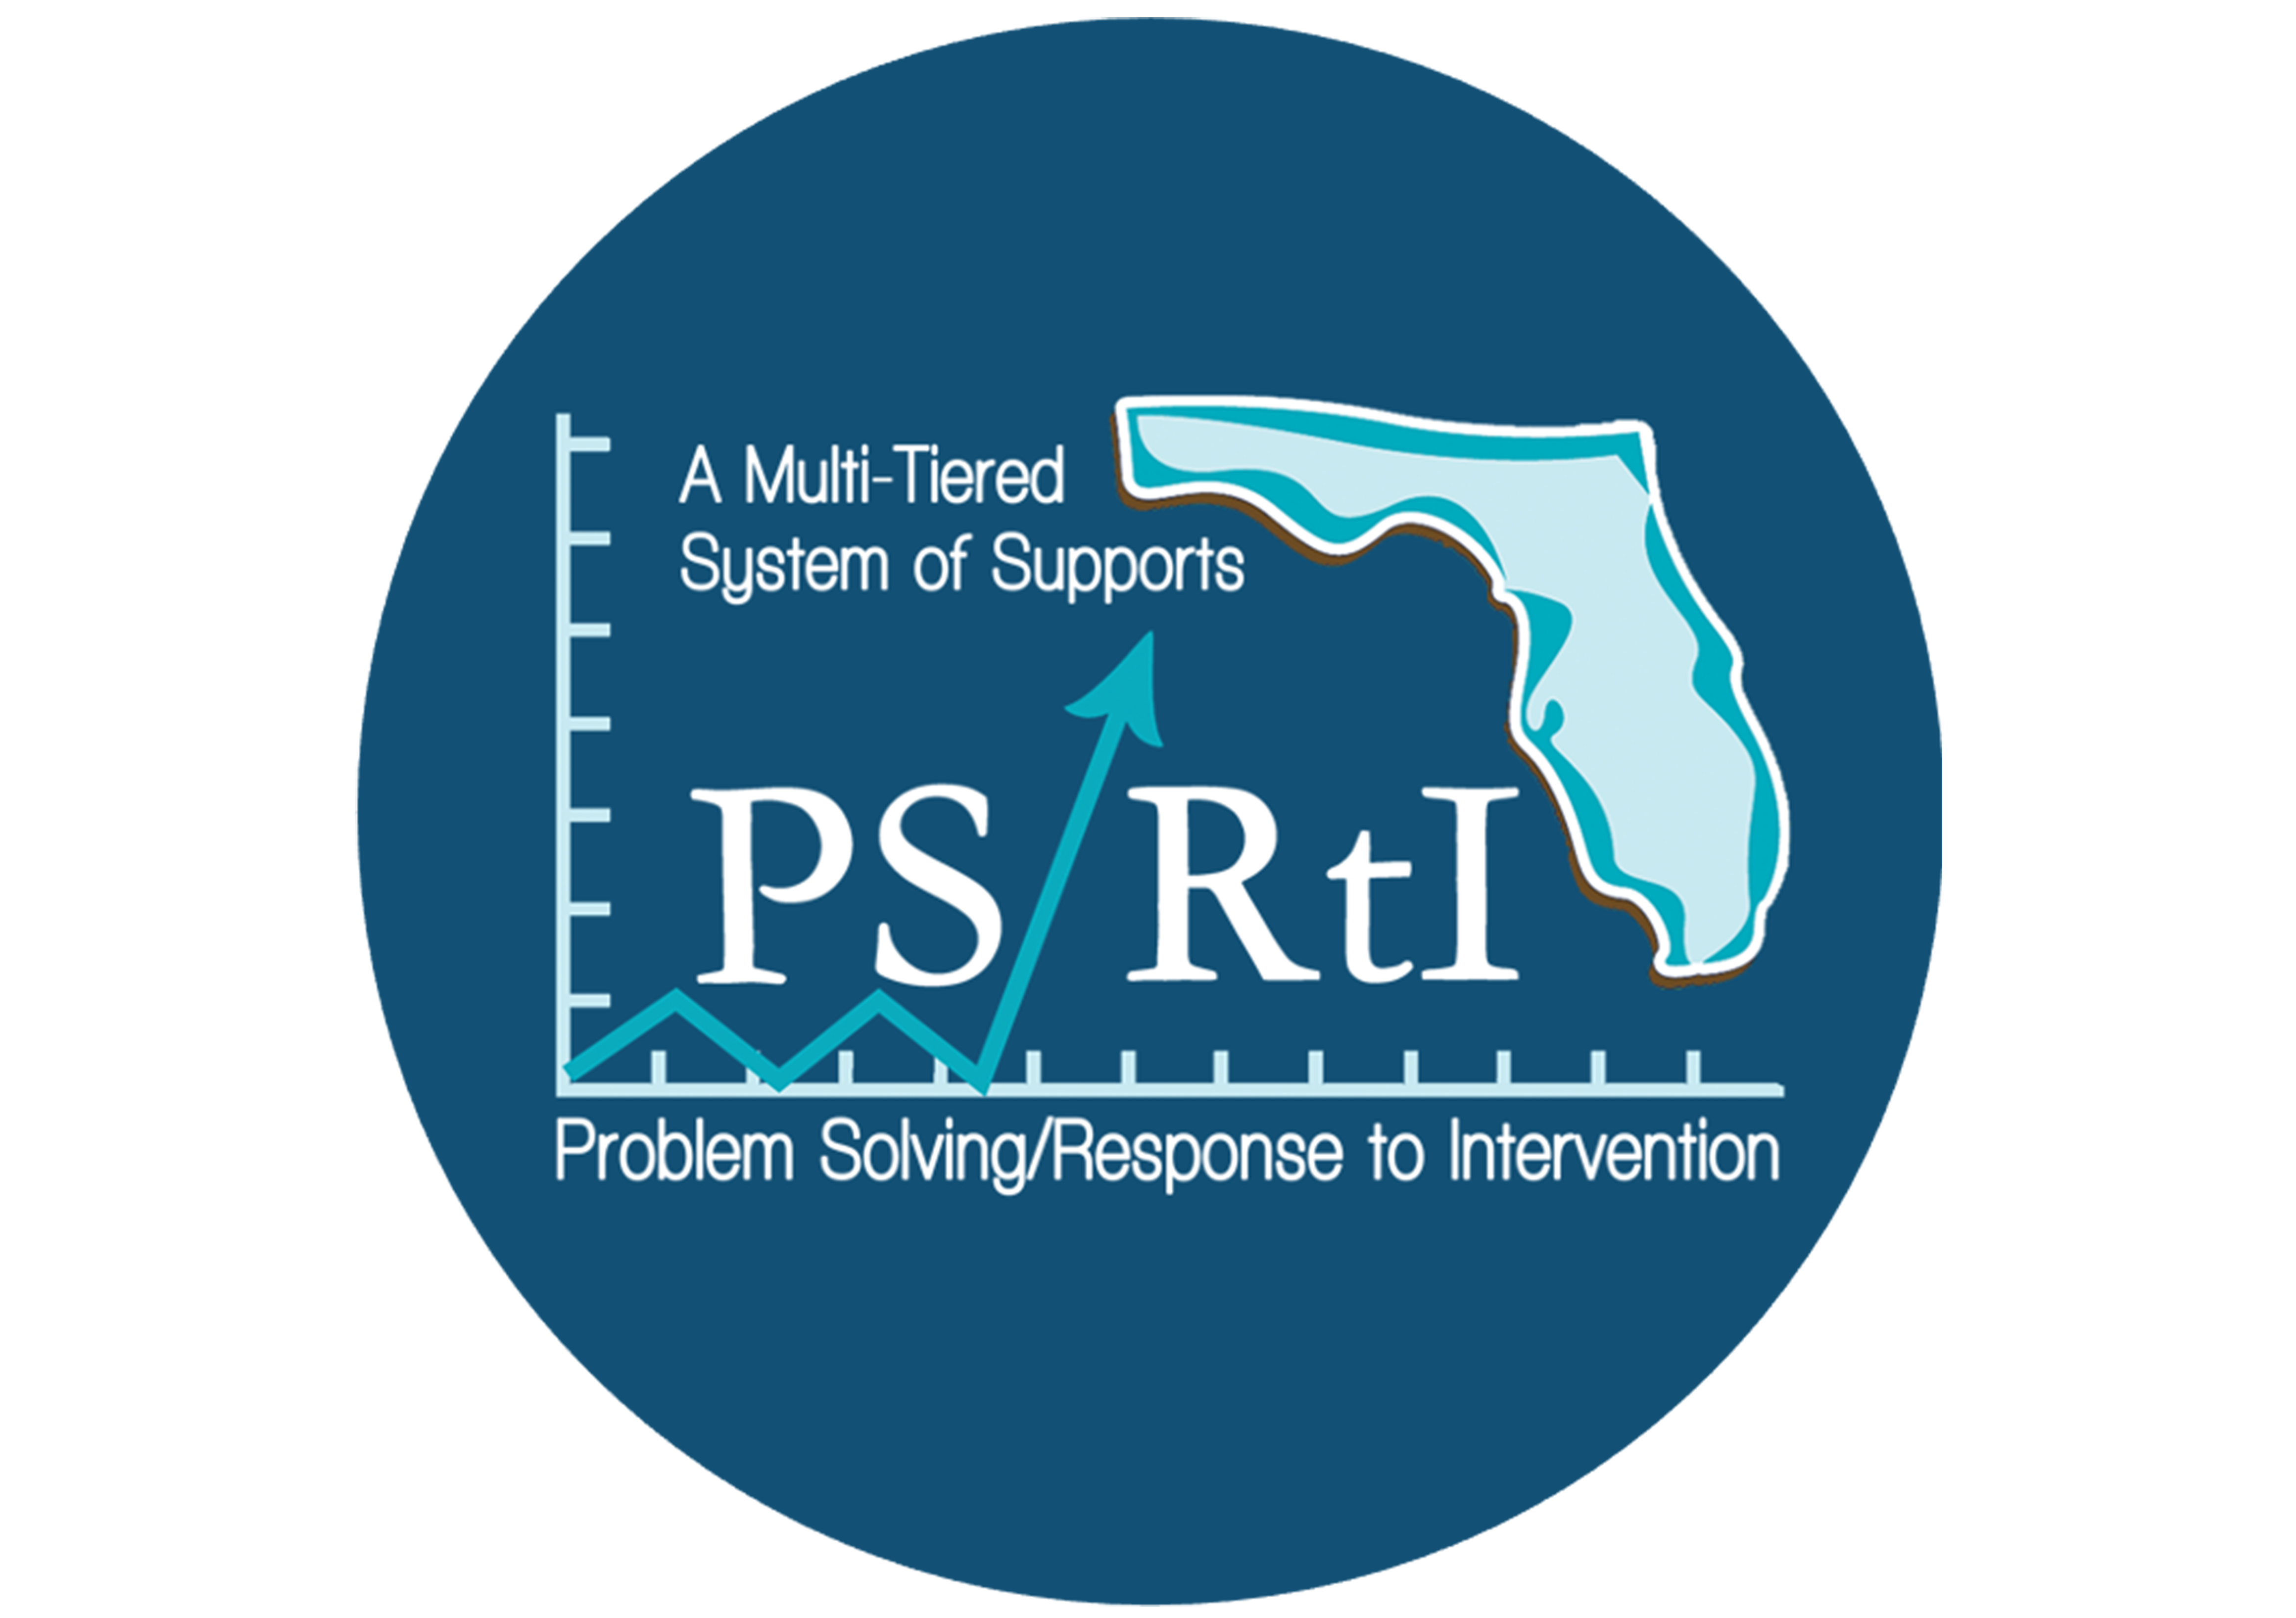 PS/RtI, a Multi-Tiered System of Supports